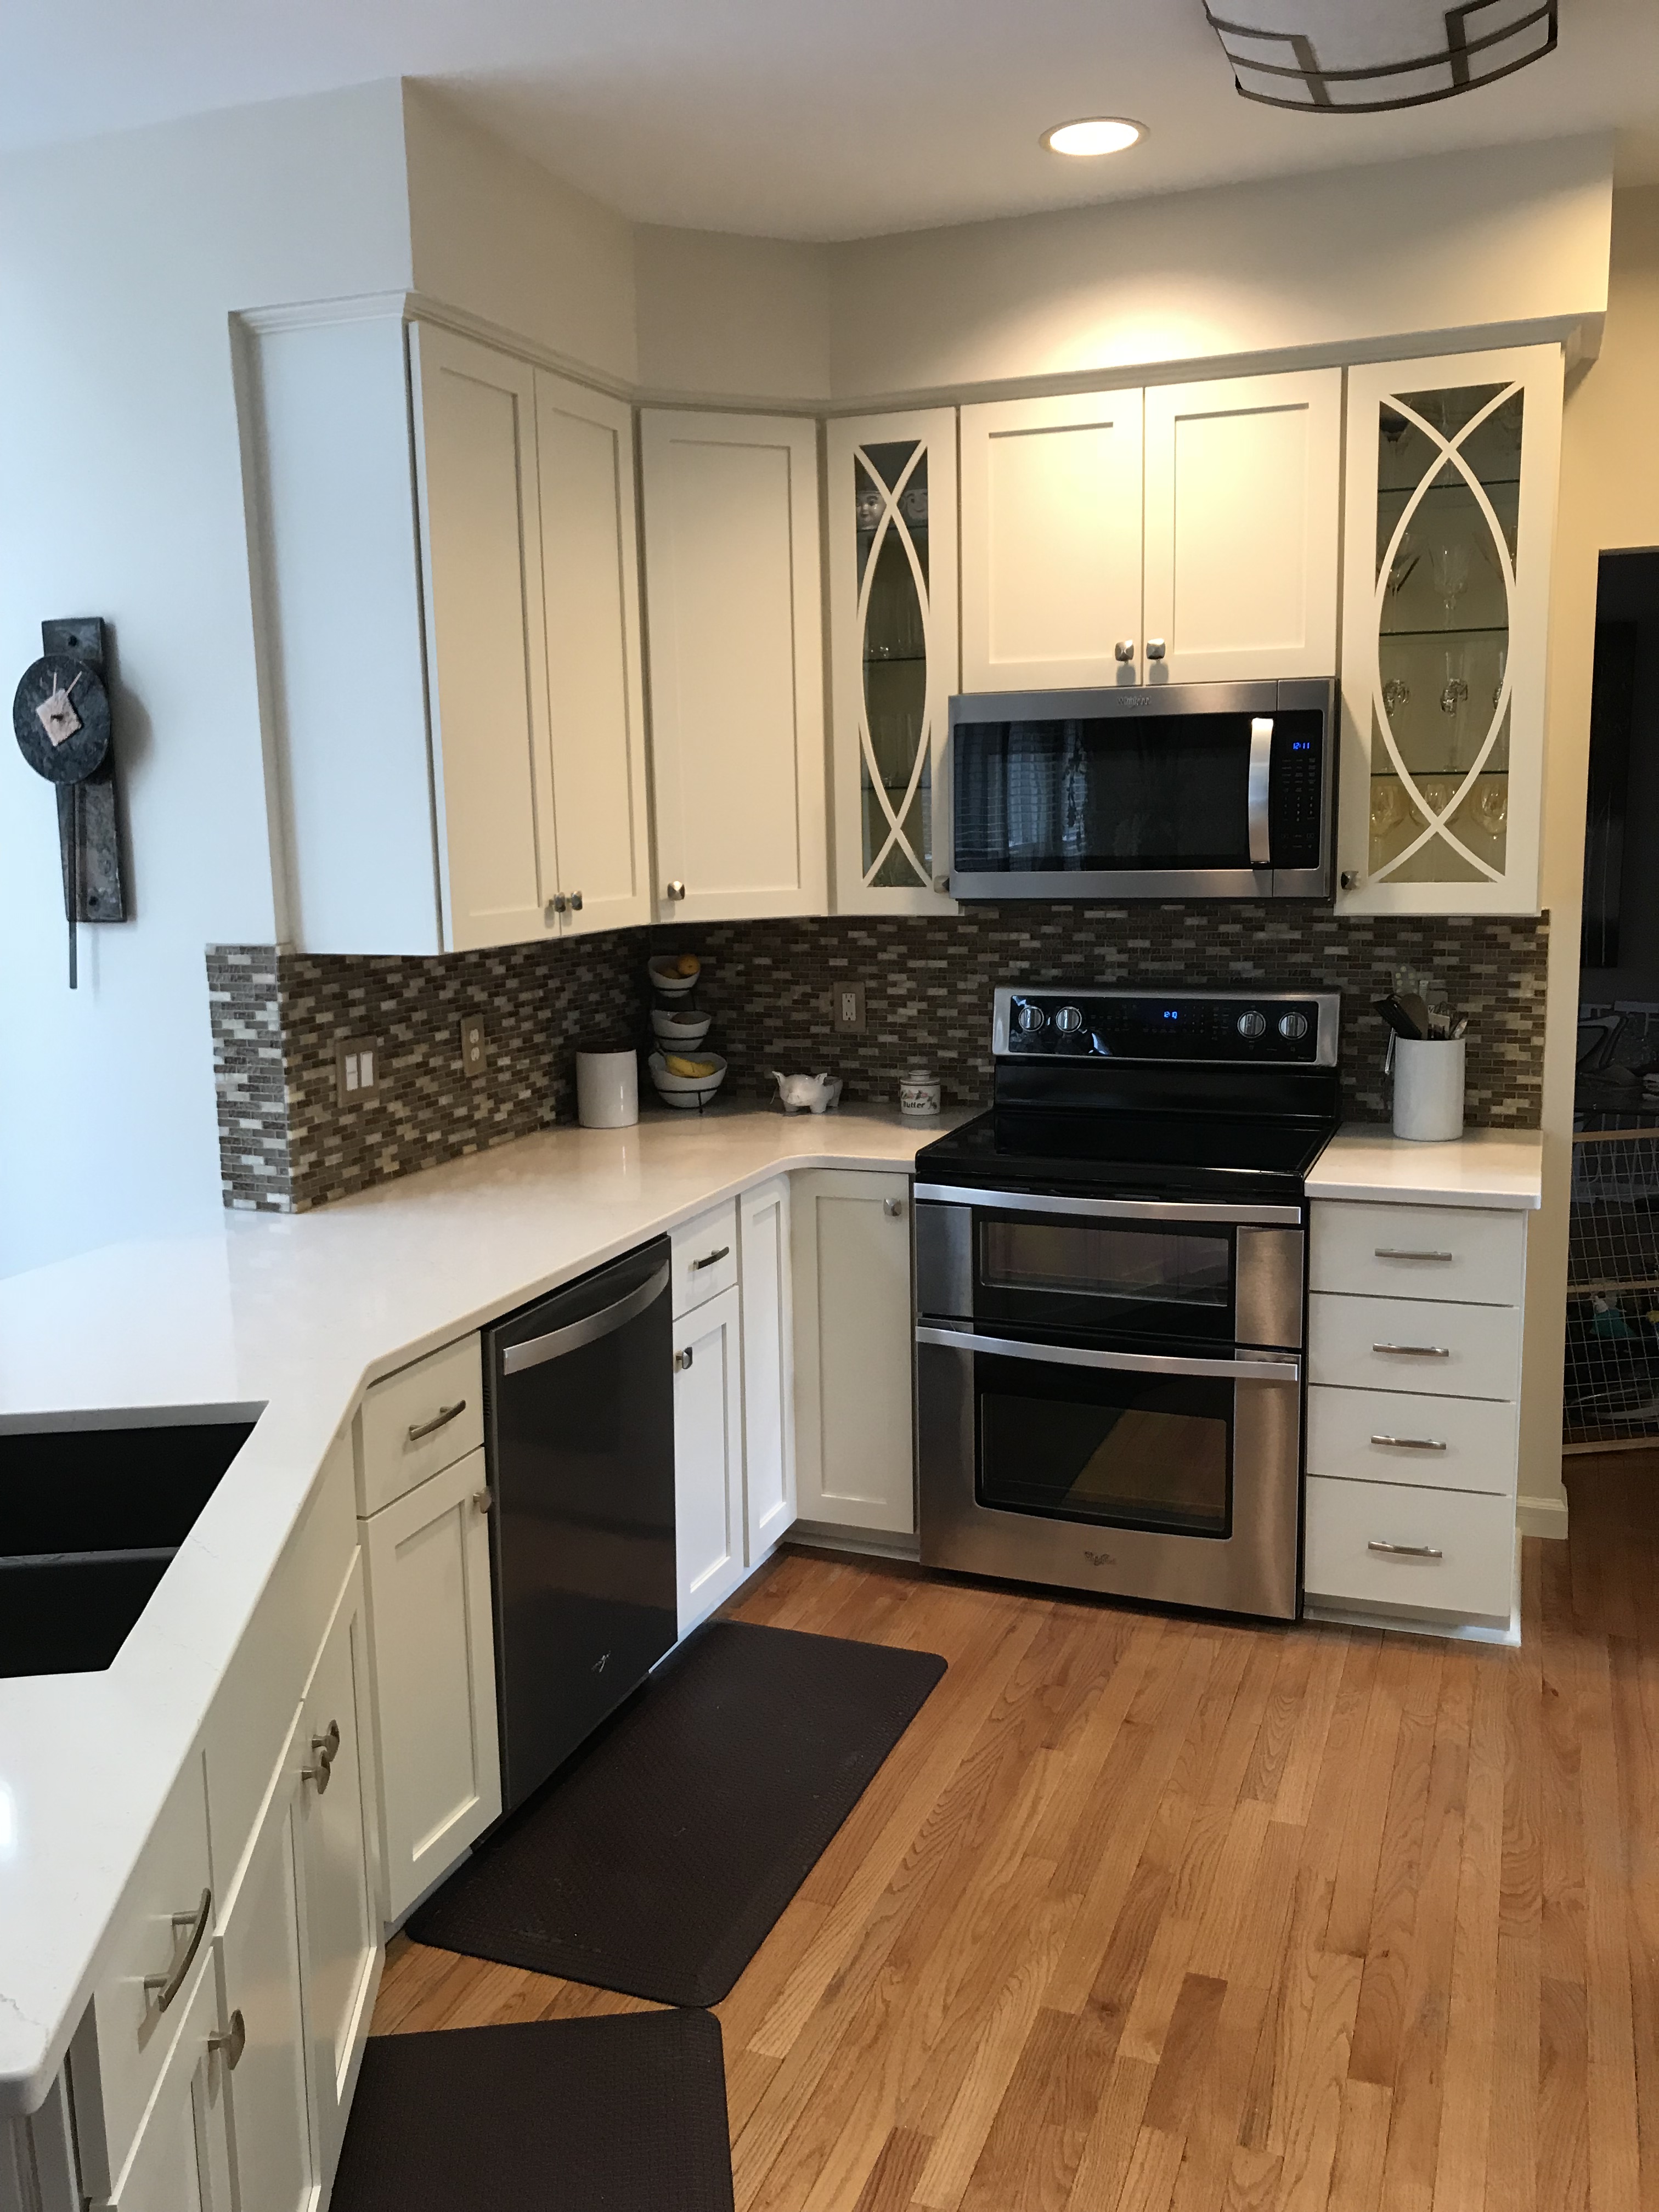 Renuit Cabinet Refacing Reviews / Kitchen Cabinet Refacing | Review of